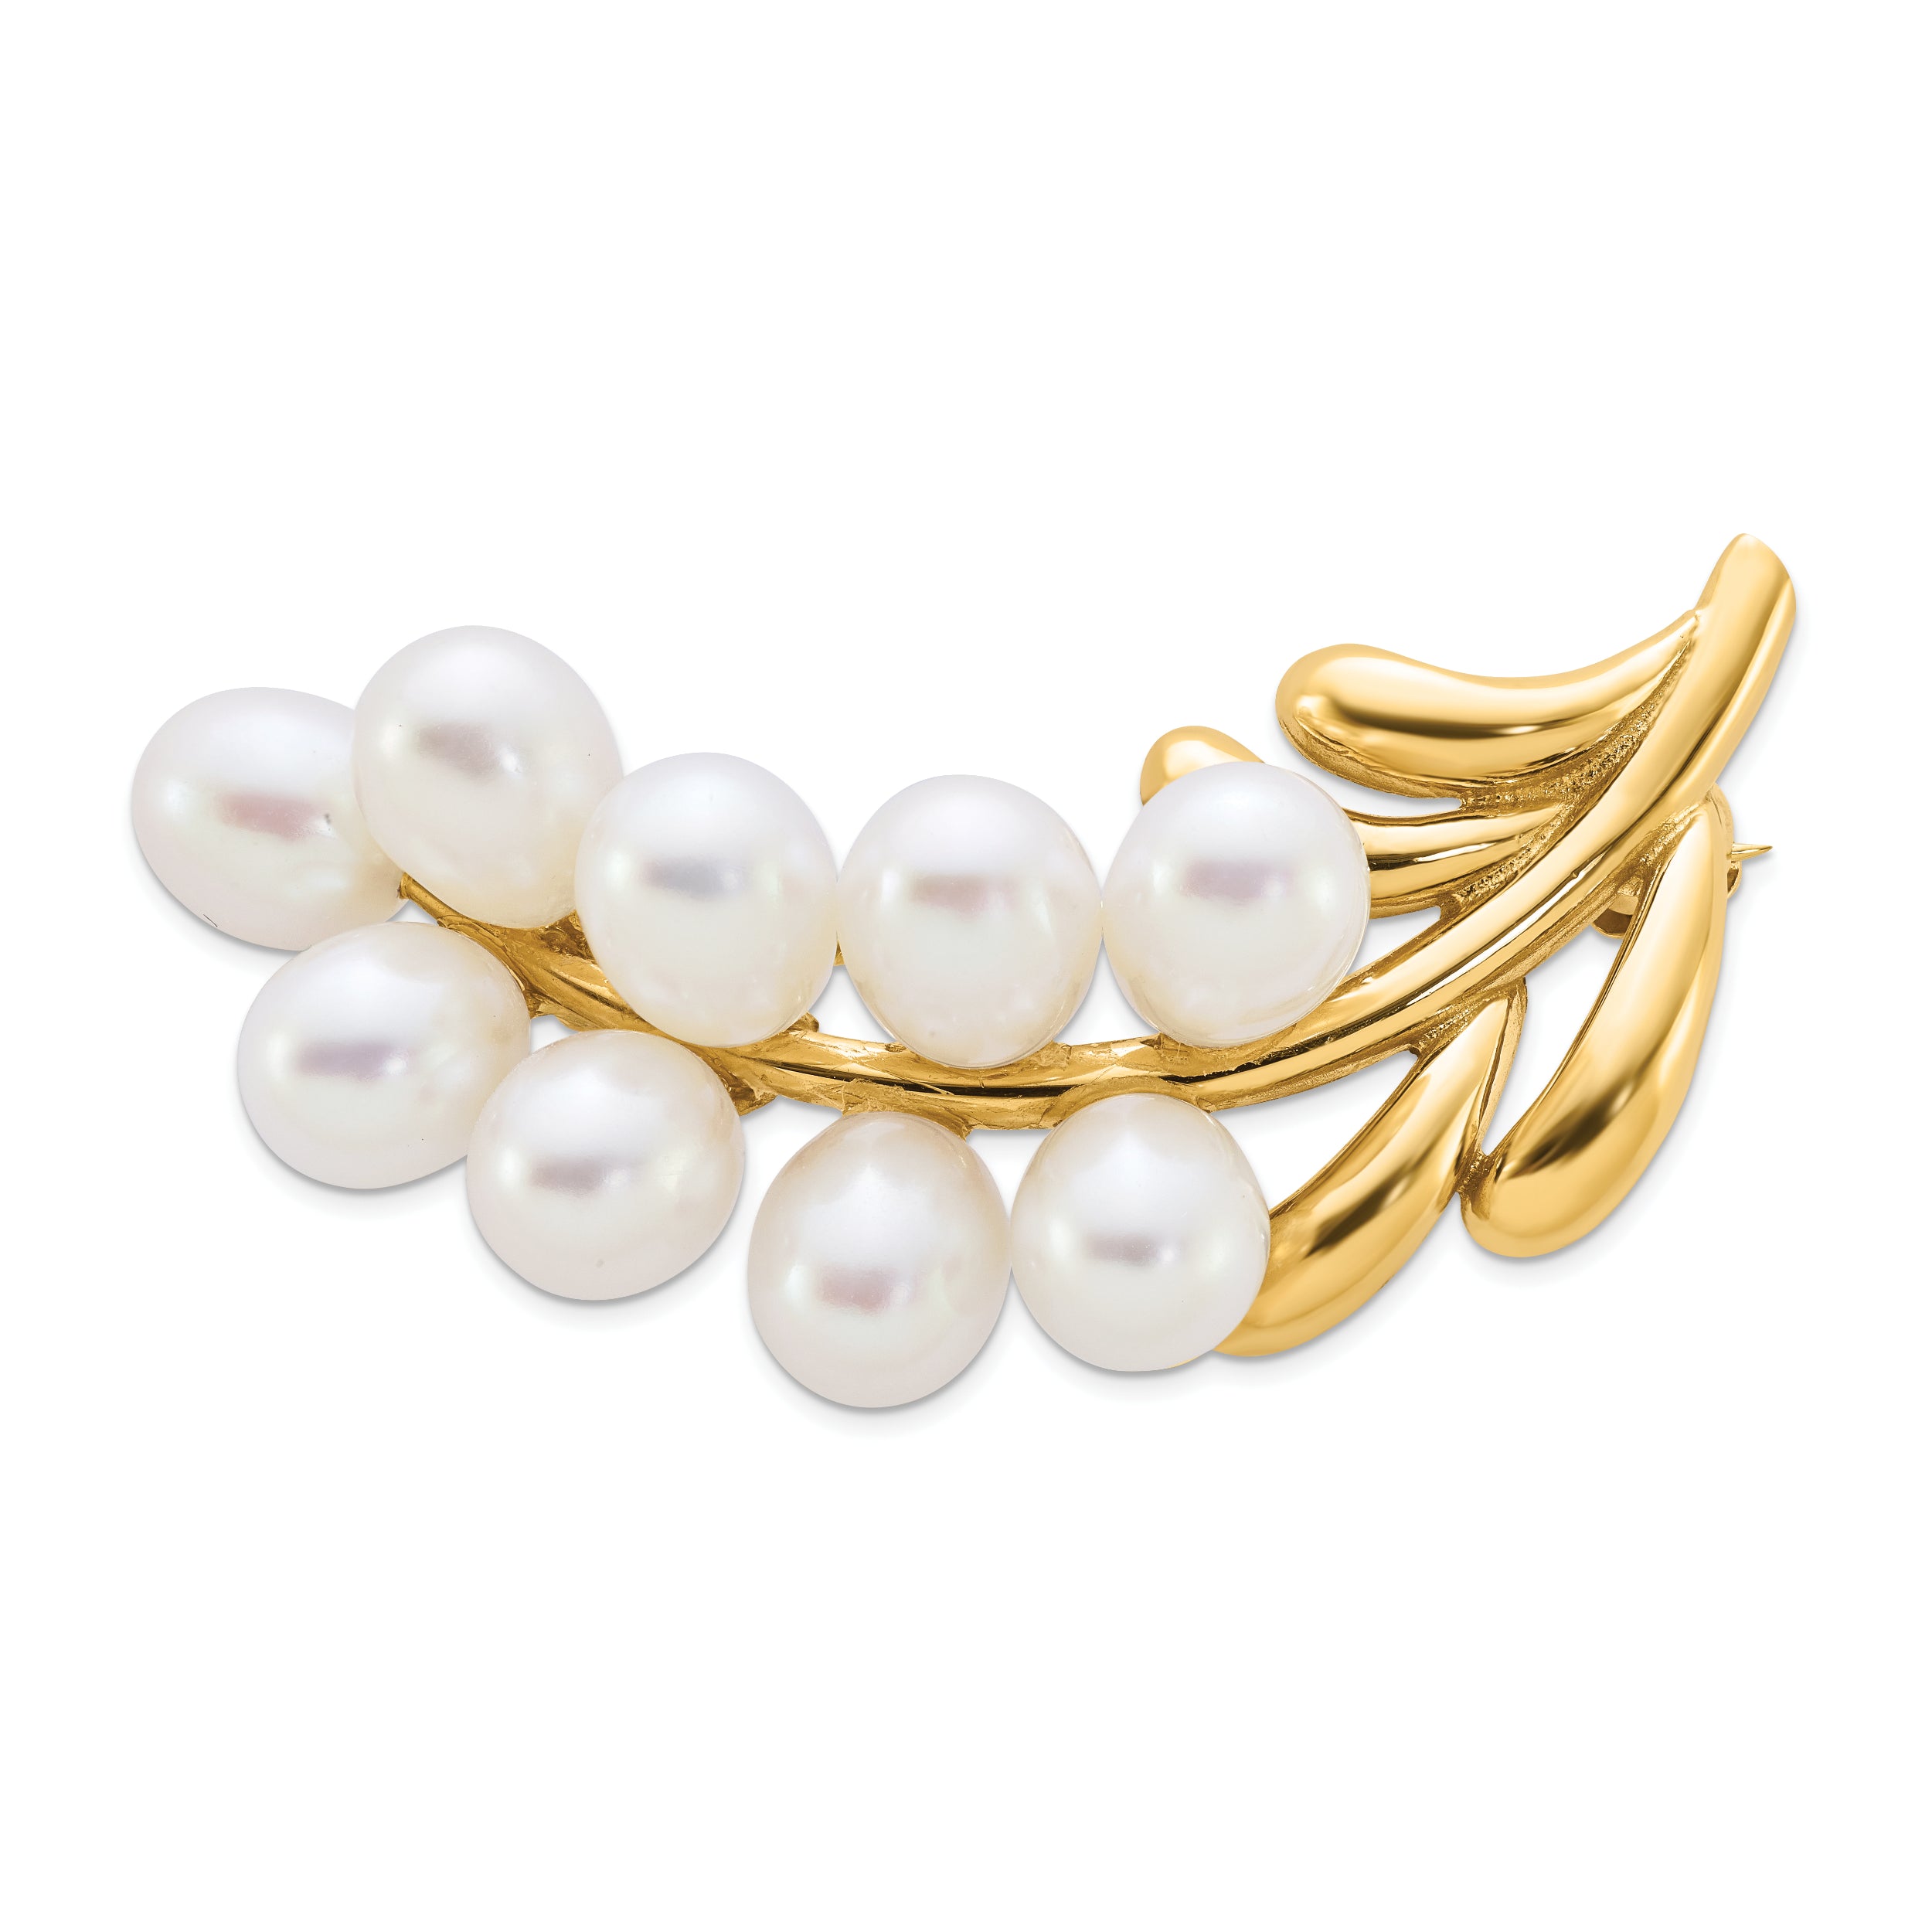 14k Polished Cluster 5-6mm White Rice Freshwater Cultured Pearl Pin Brooch